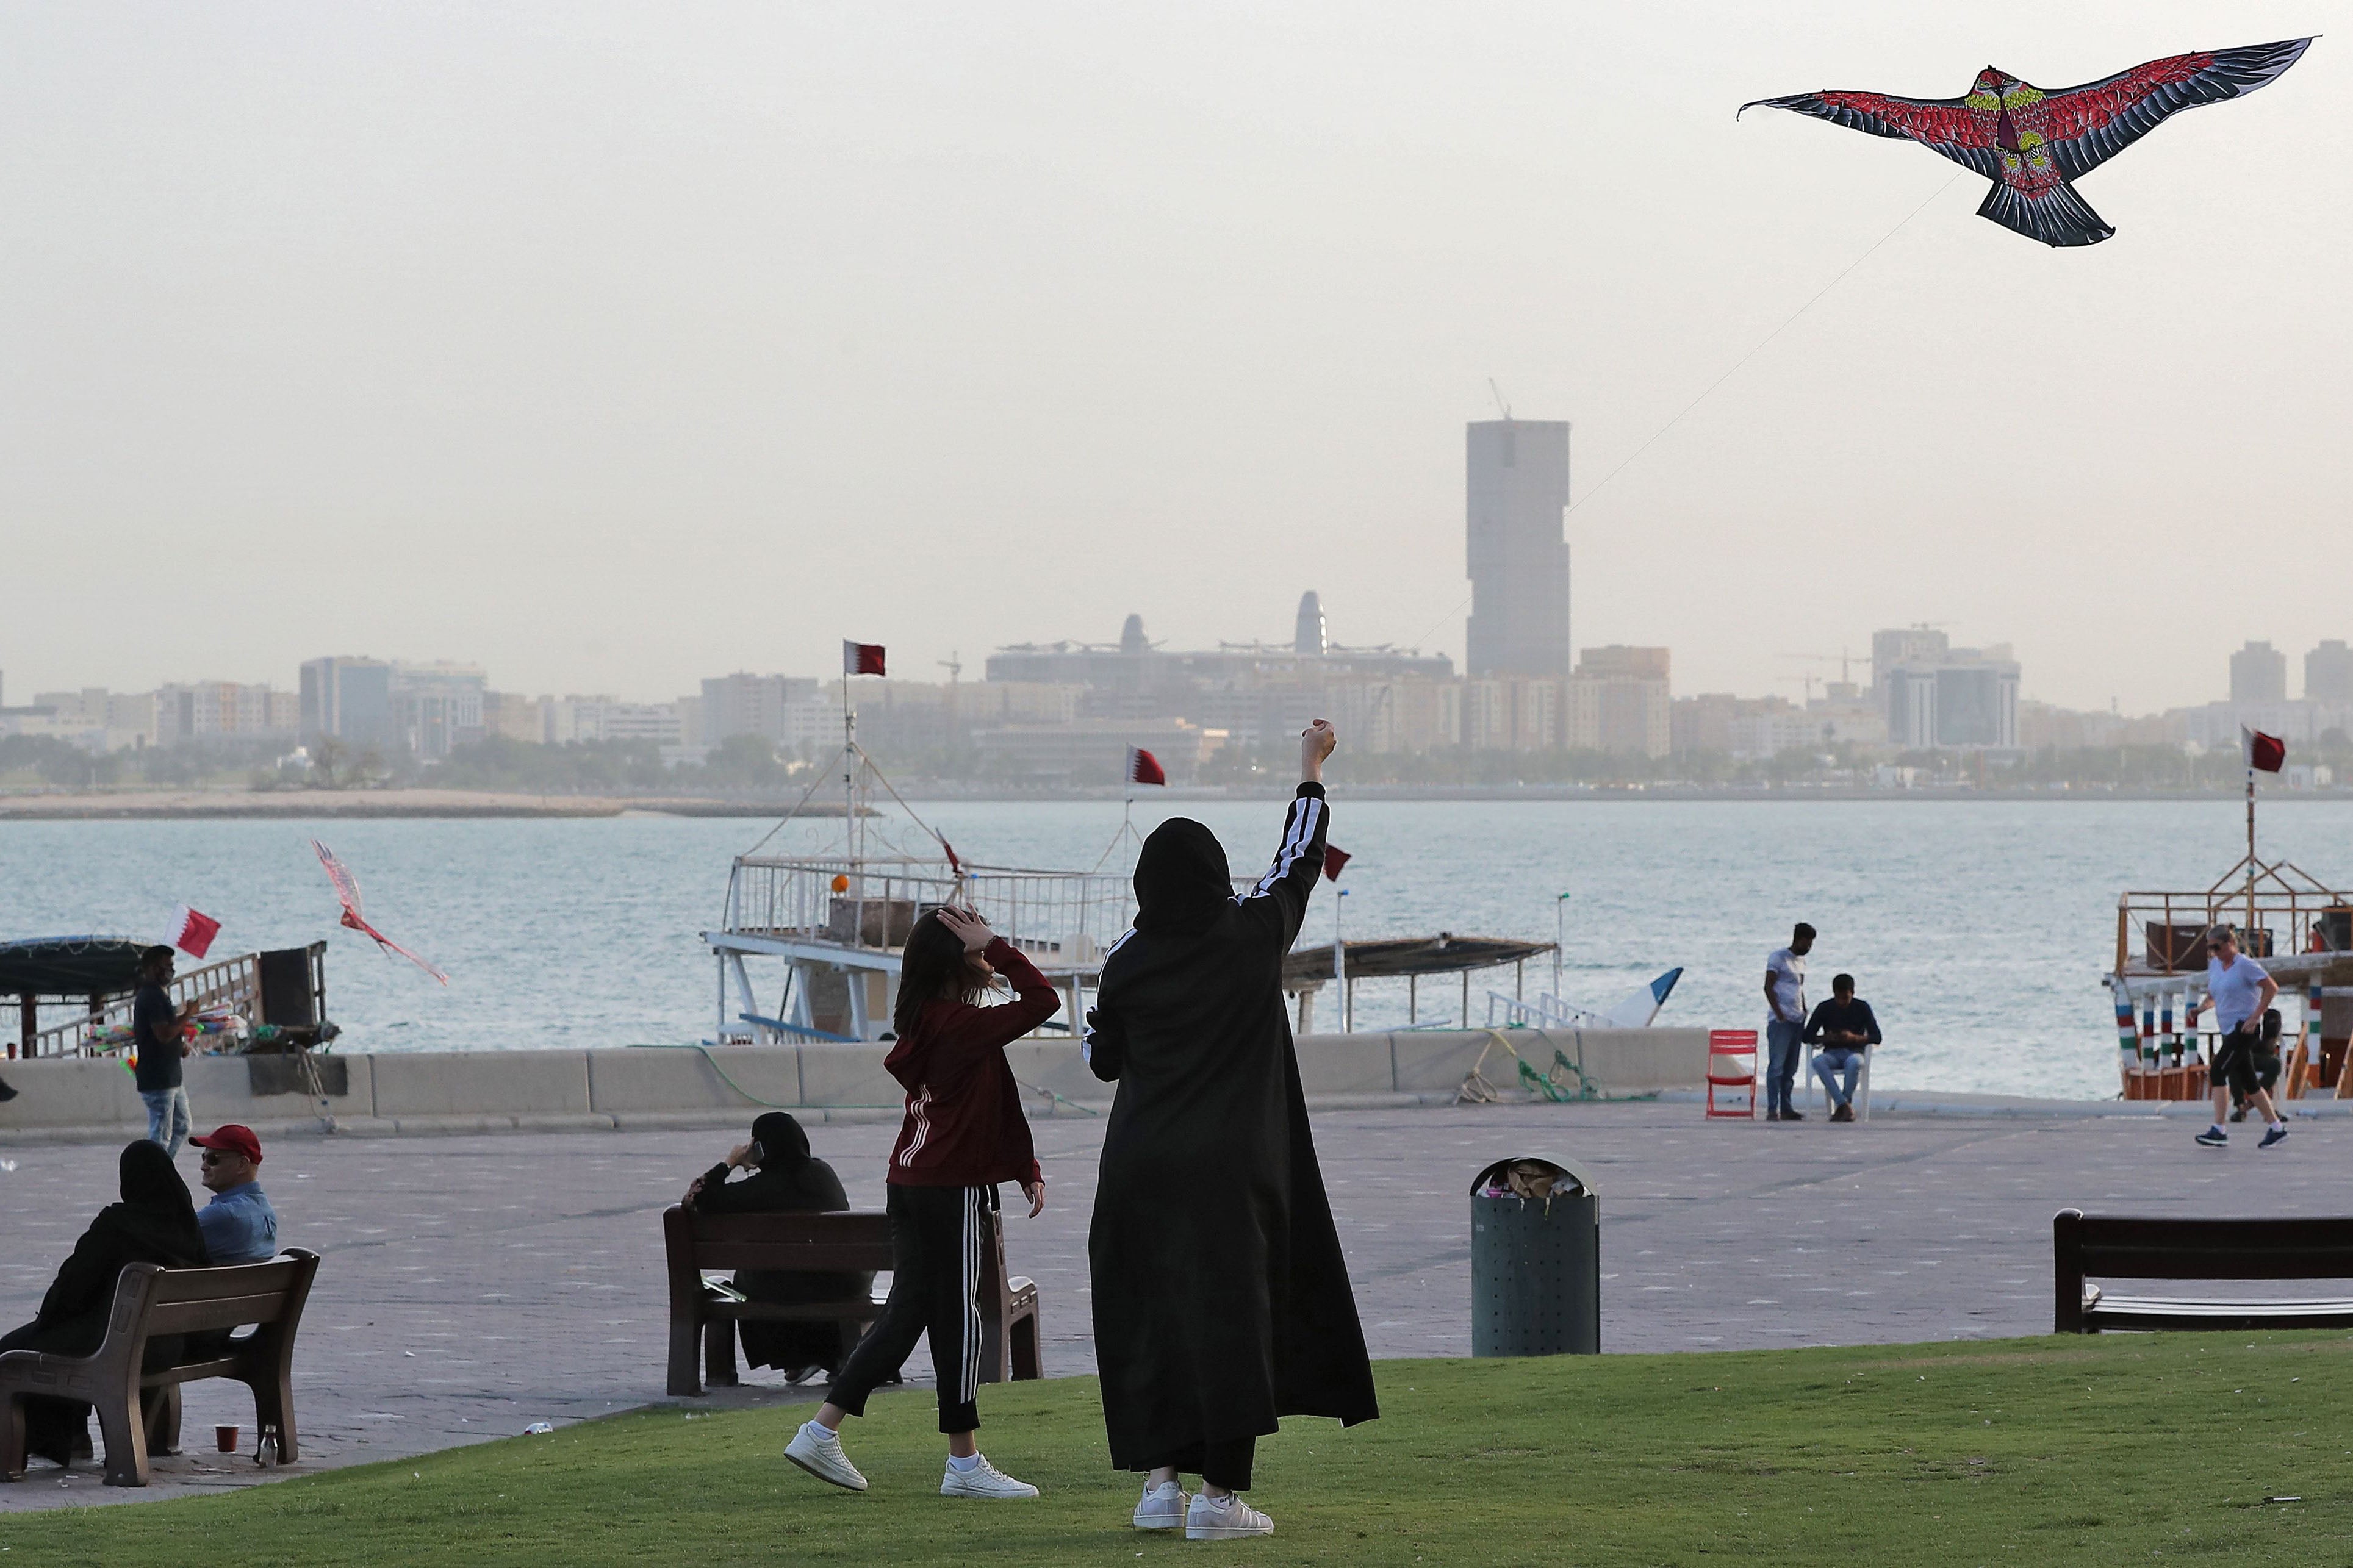 Qatar: Male Guardianship Severely Curtails Women’s Rights